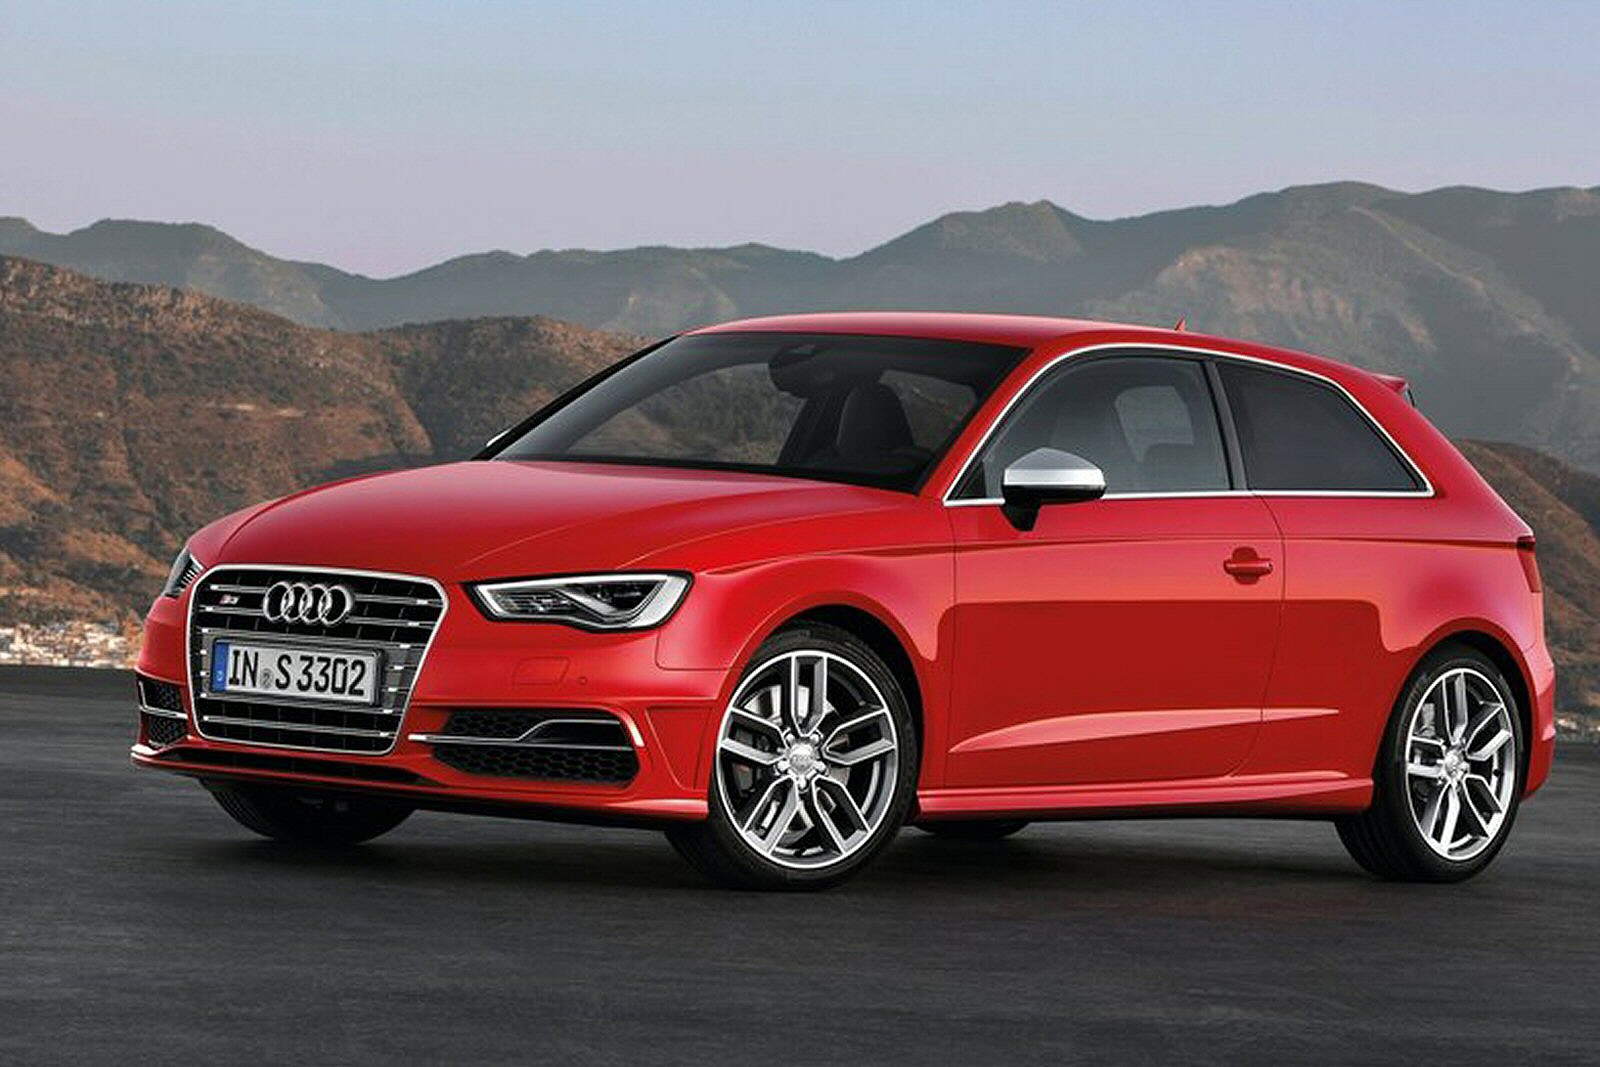 Front view of 2014 Audi S3